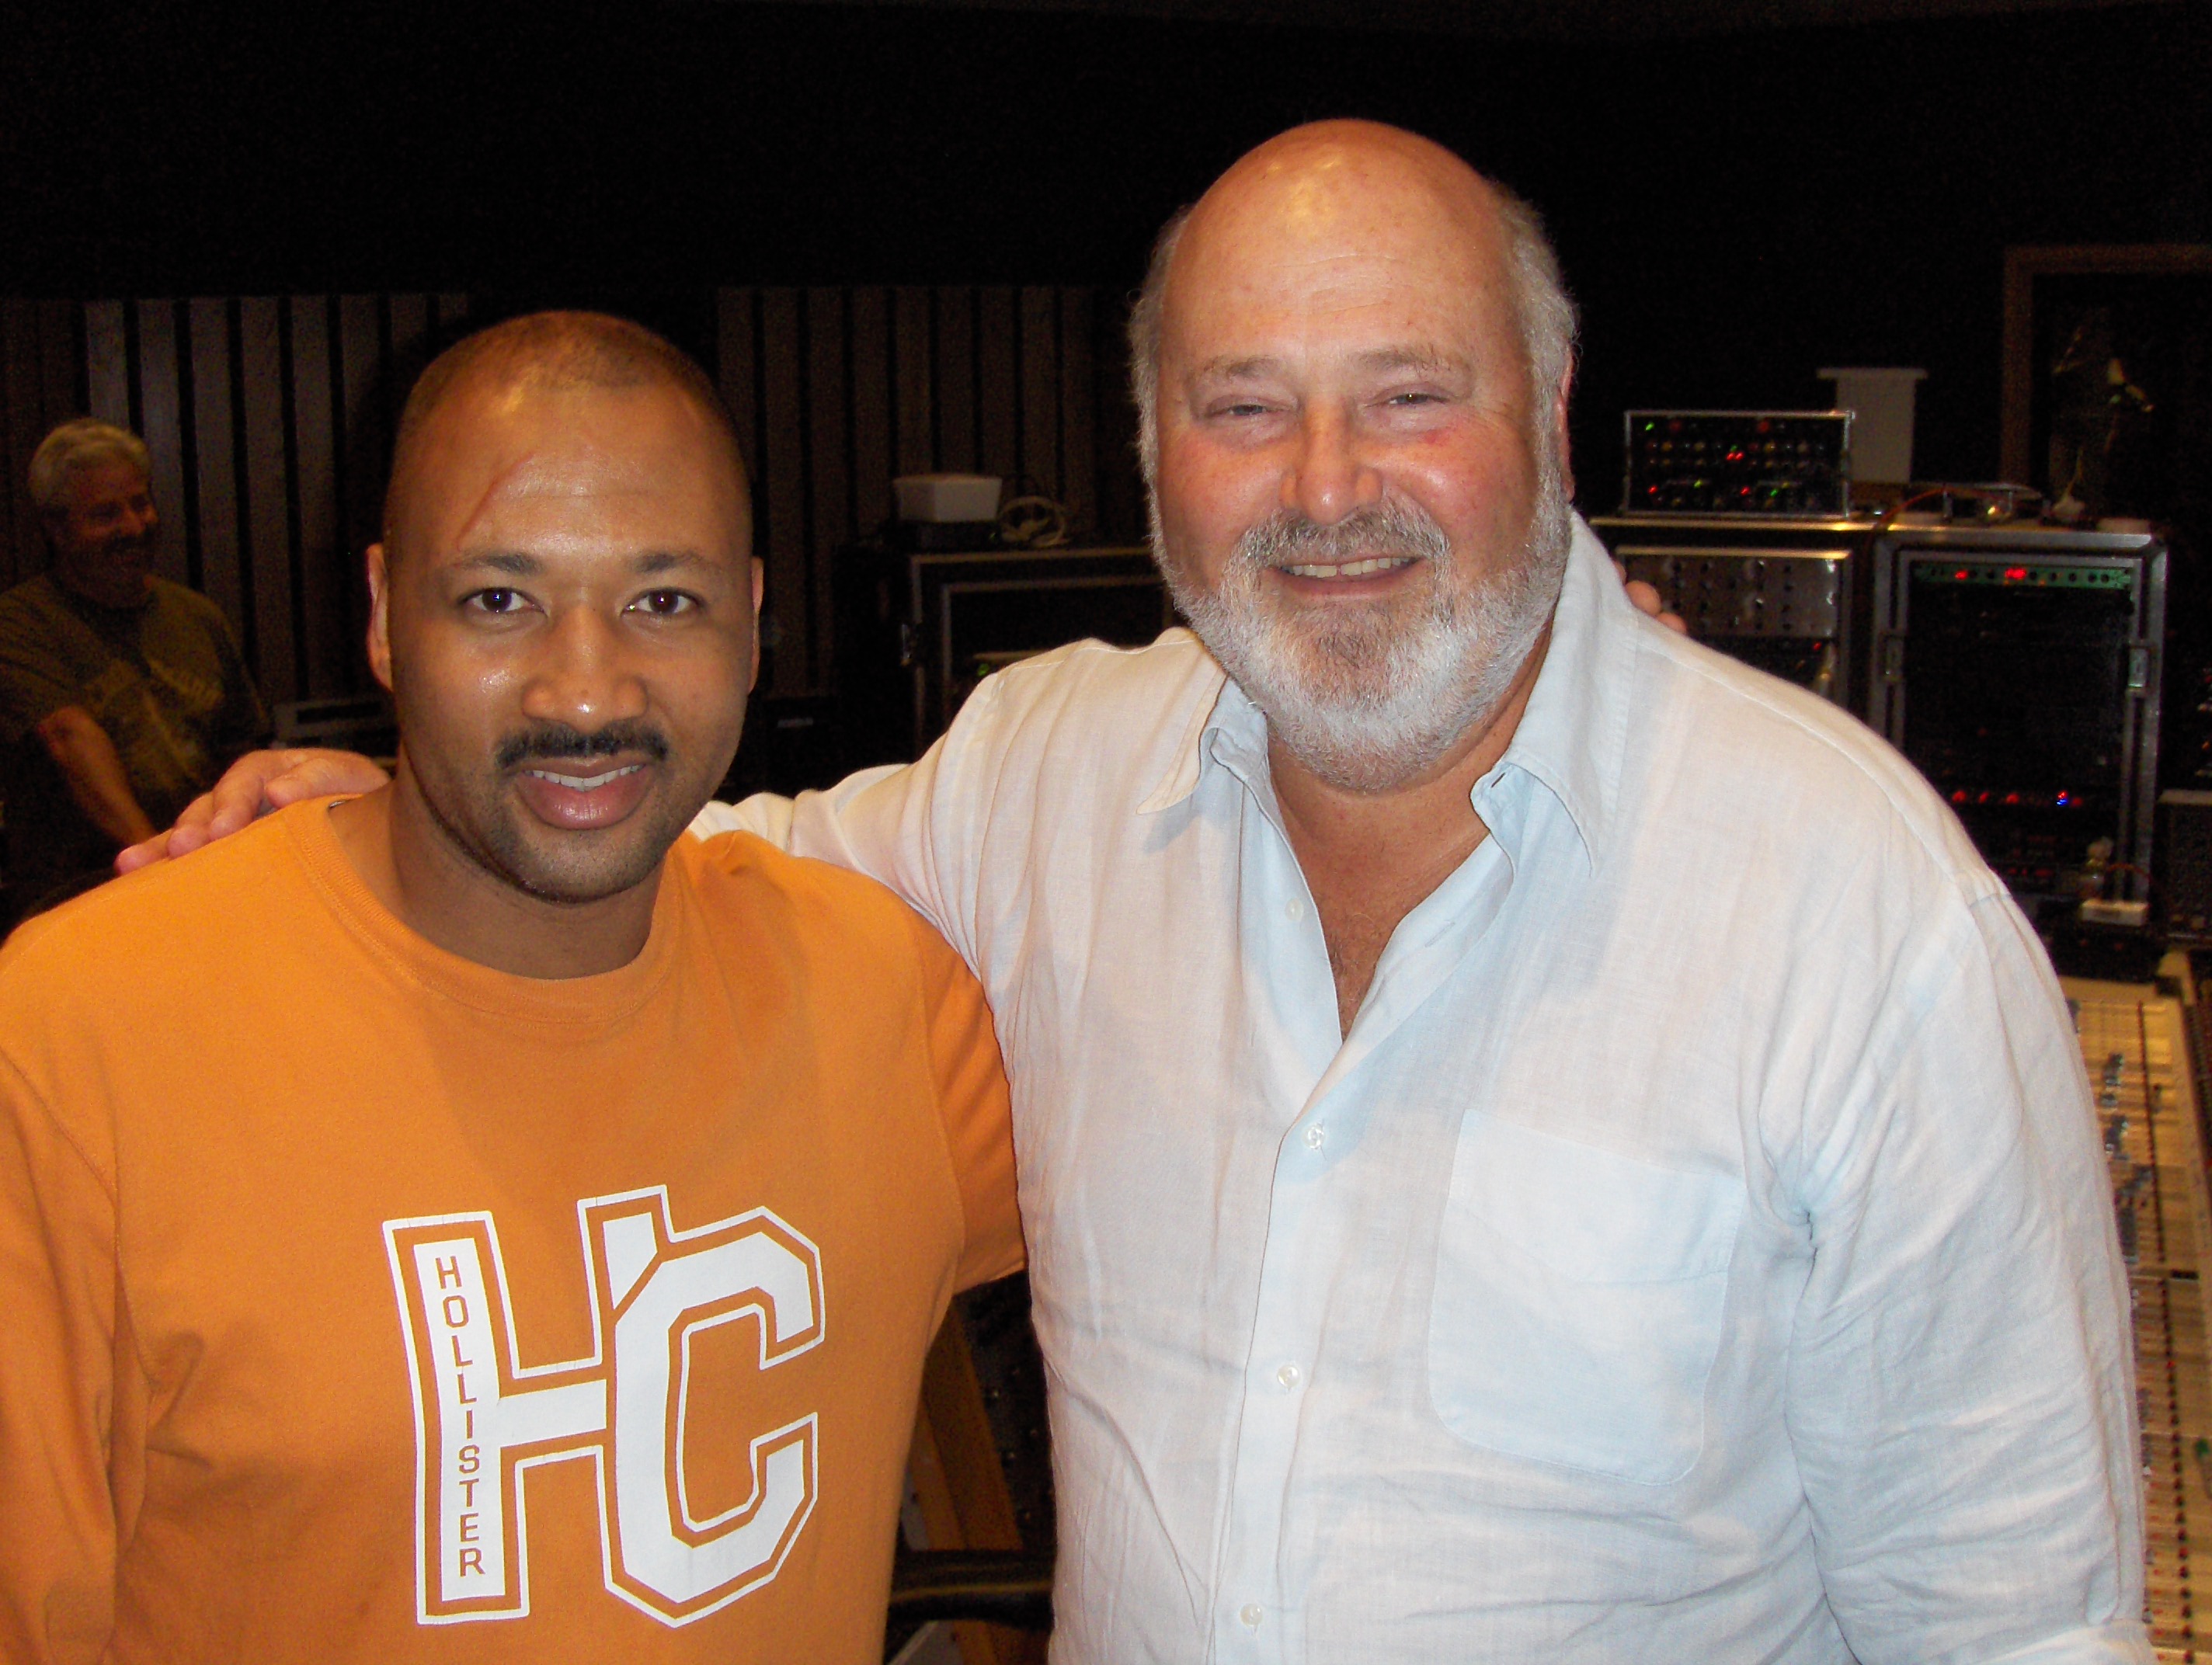 Alex Al with director Rob Reiner at recording session for movie soundtrack